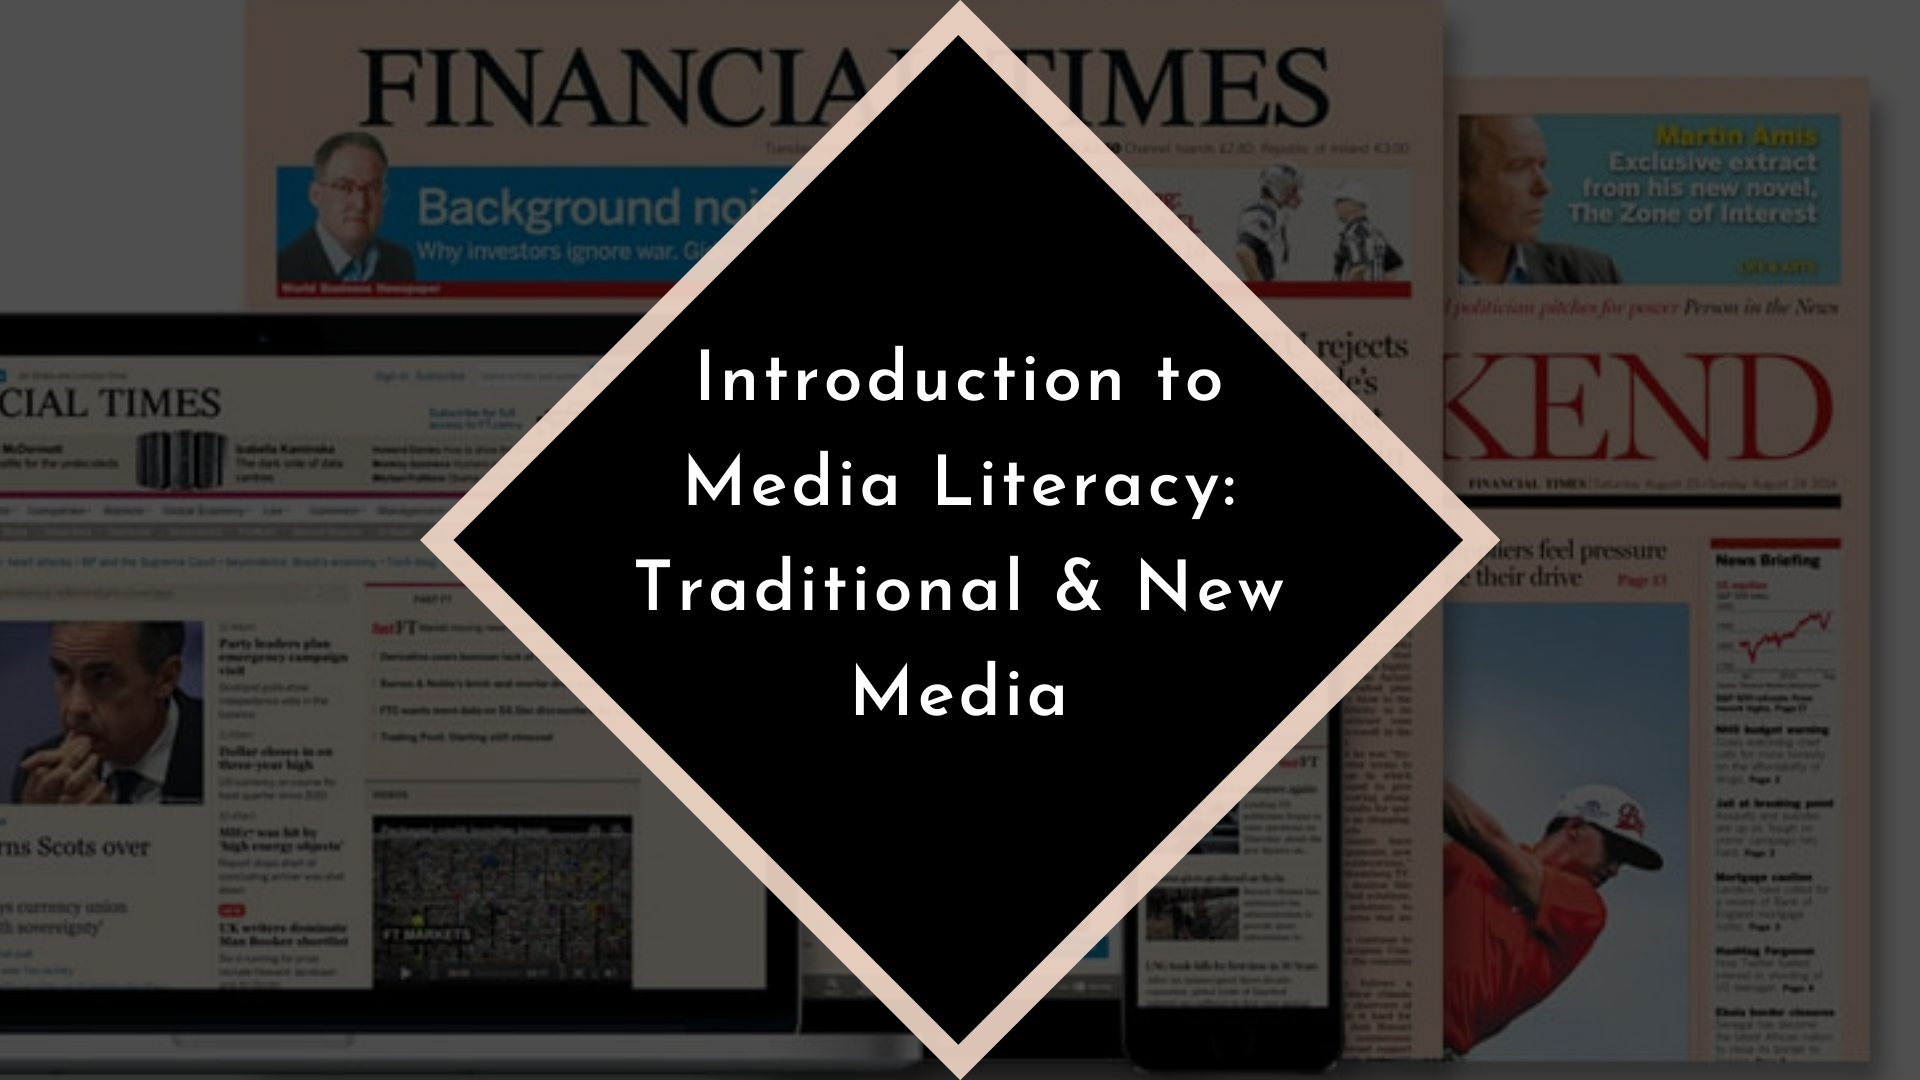 Introduction to Media Literacy Traditional & New Media course image